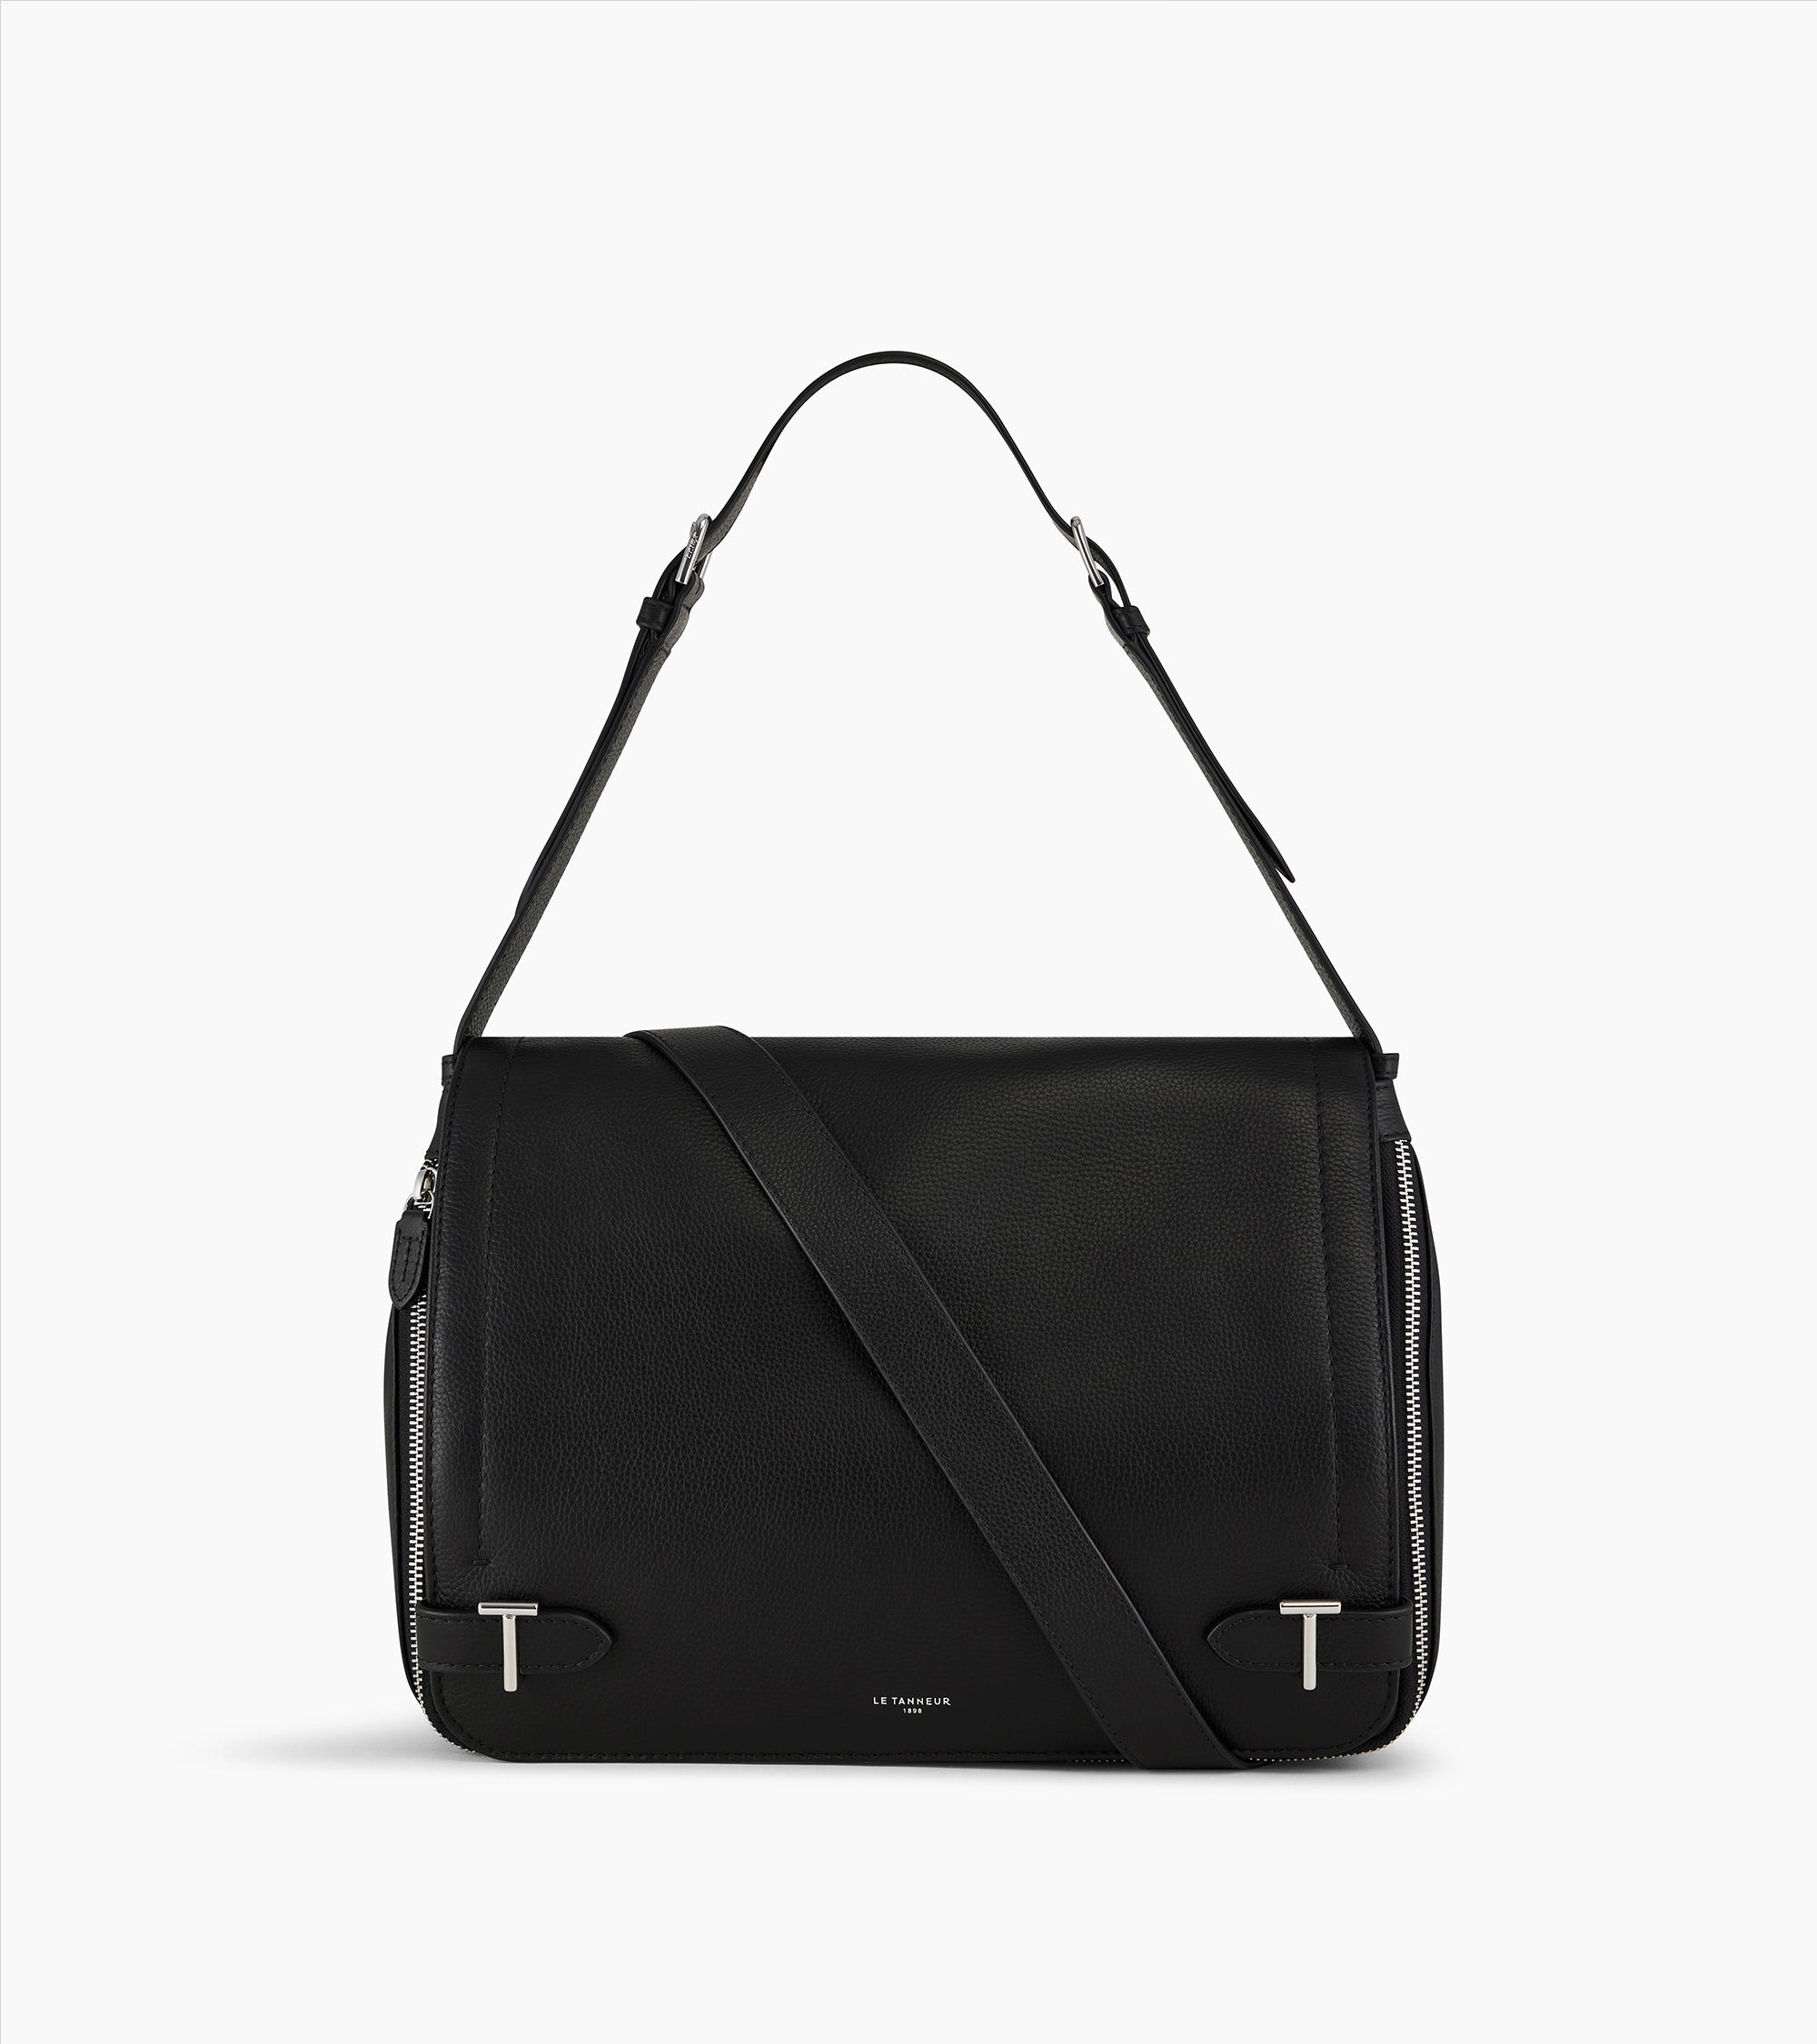 Simone large bag with crossbody strap in grained leather